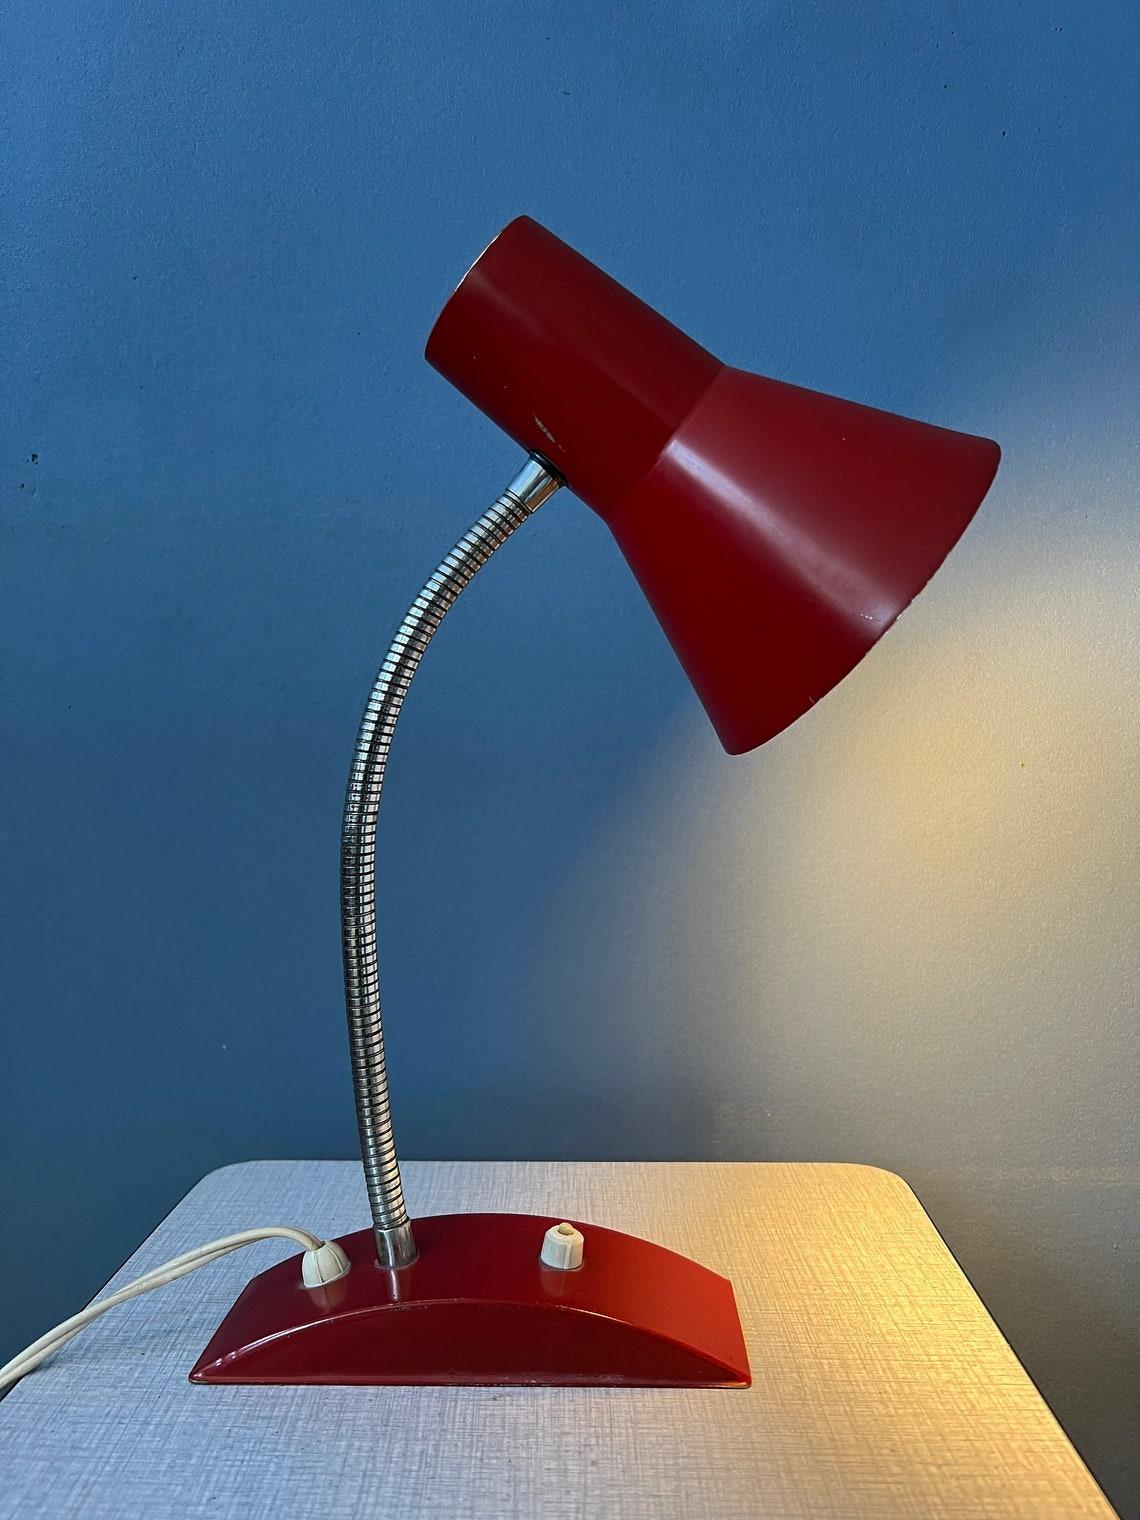 Red space age table lamp with flexible metal arm. The arm and shade can be positioned in any way desirable. The lamp is made out of metal. The lamp requires one E27/26 (standard) lightbulb and currently has an EU plug.

Additional